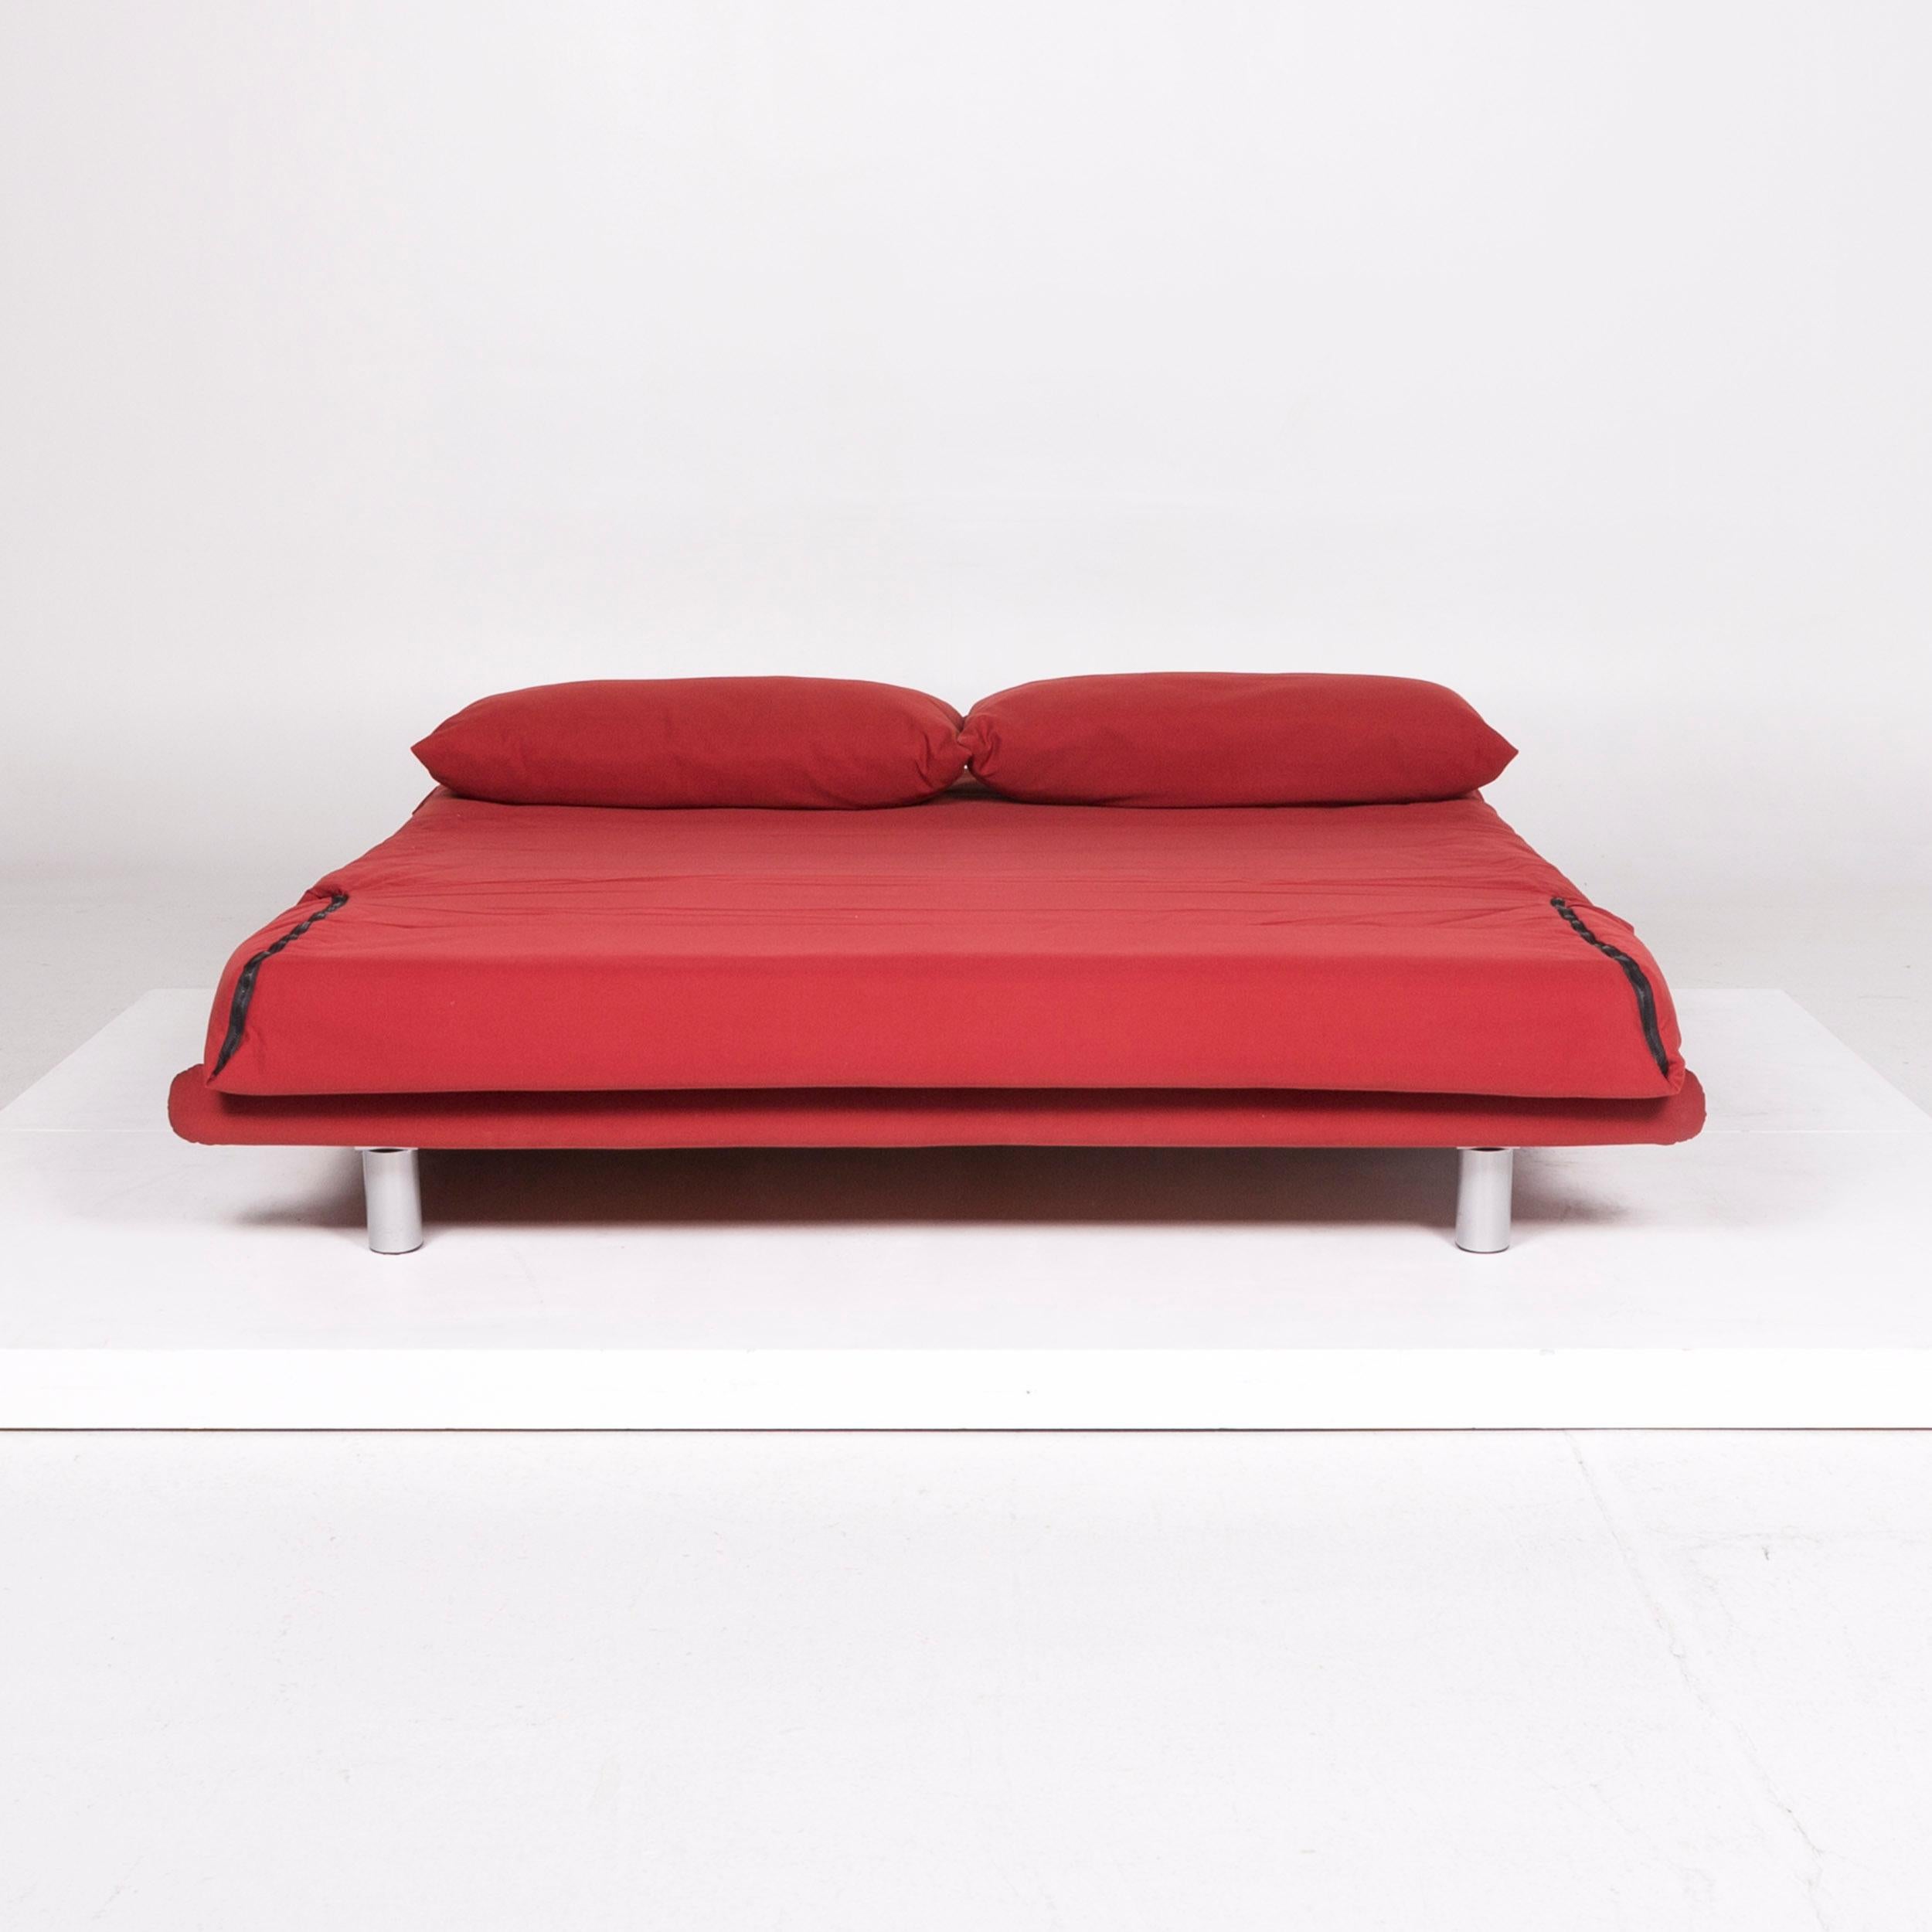 red sofa bed